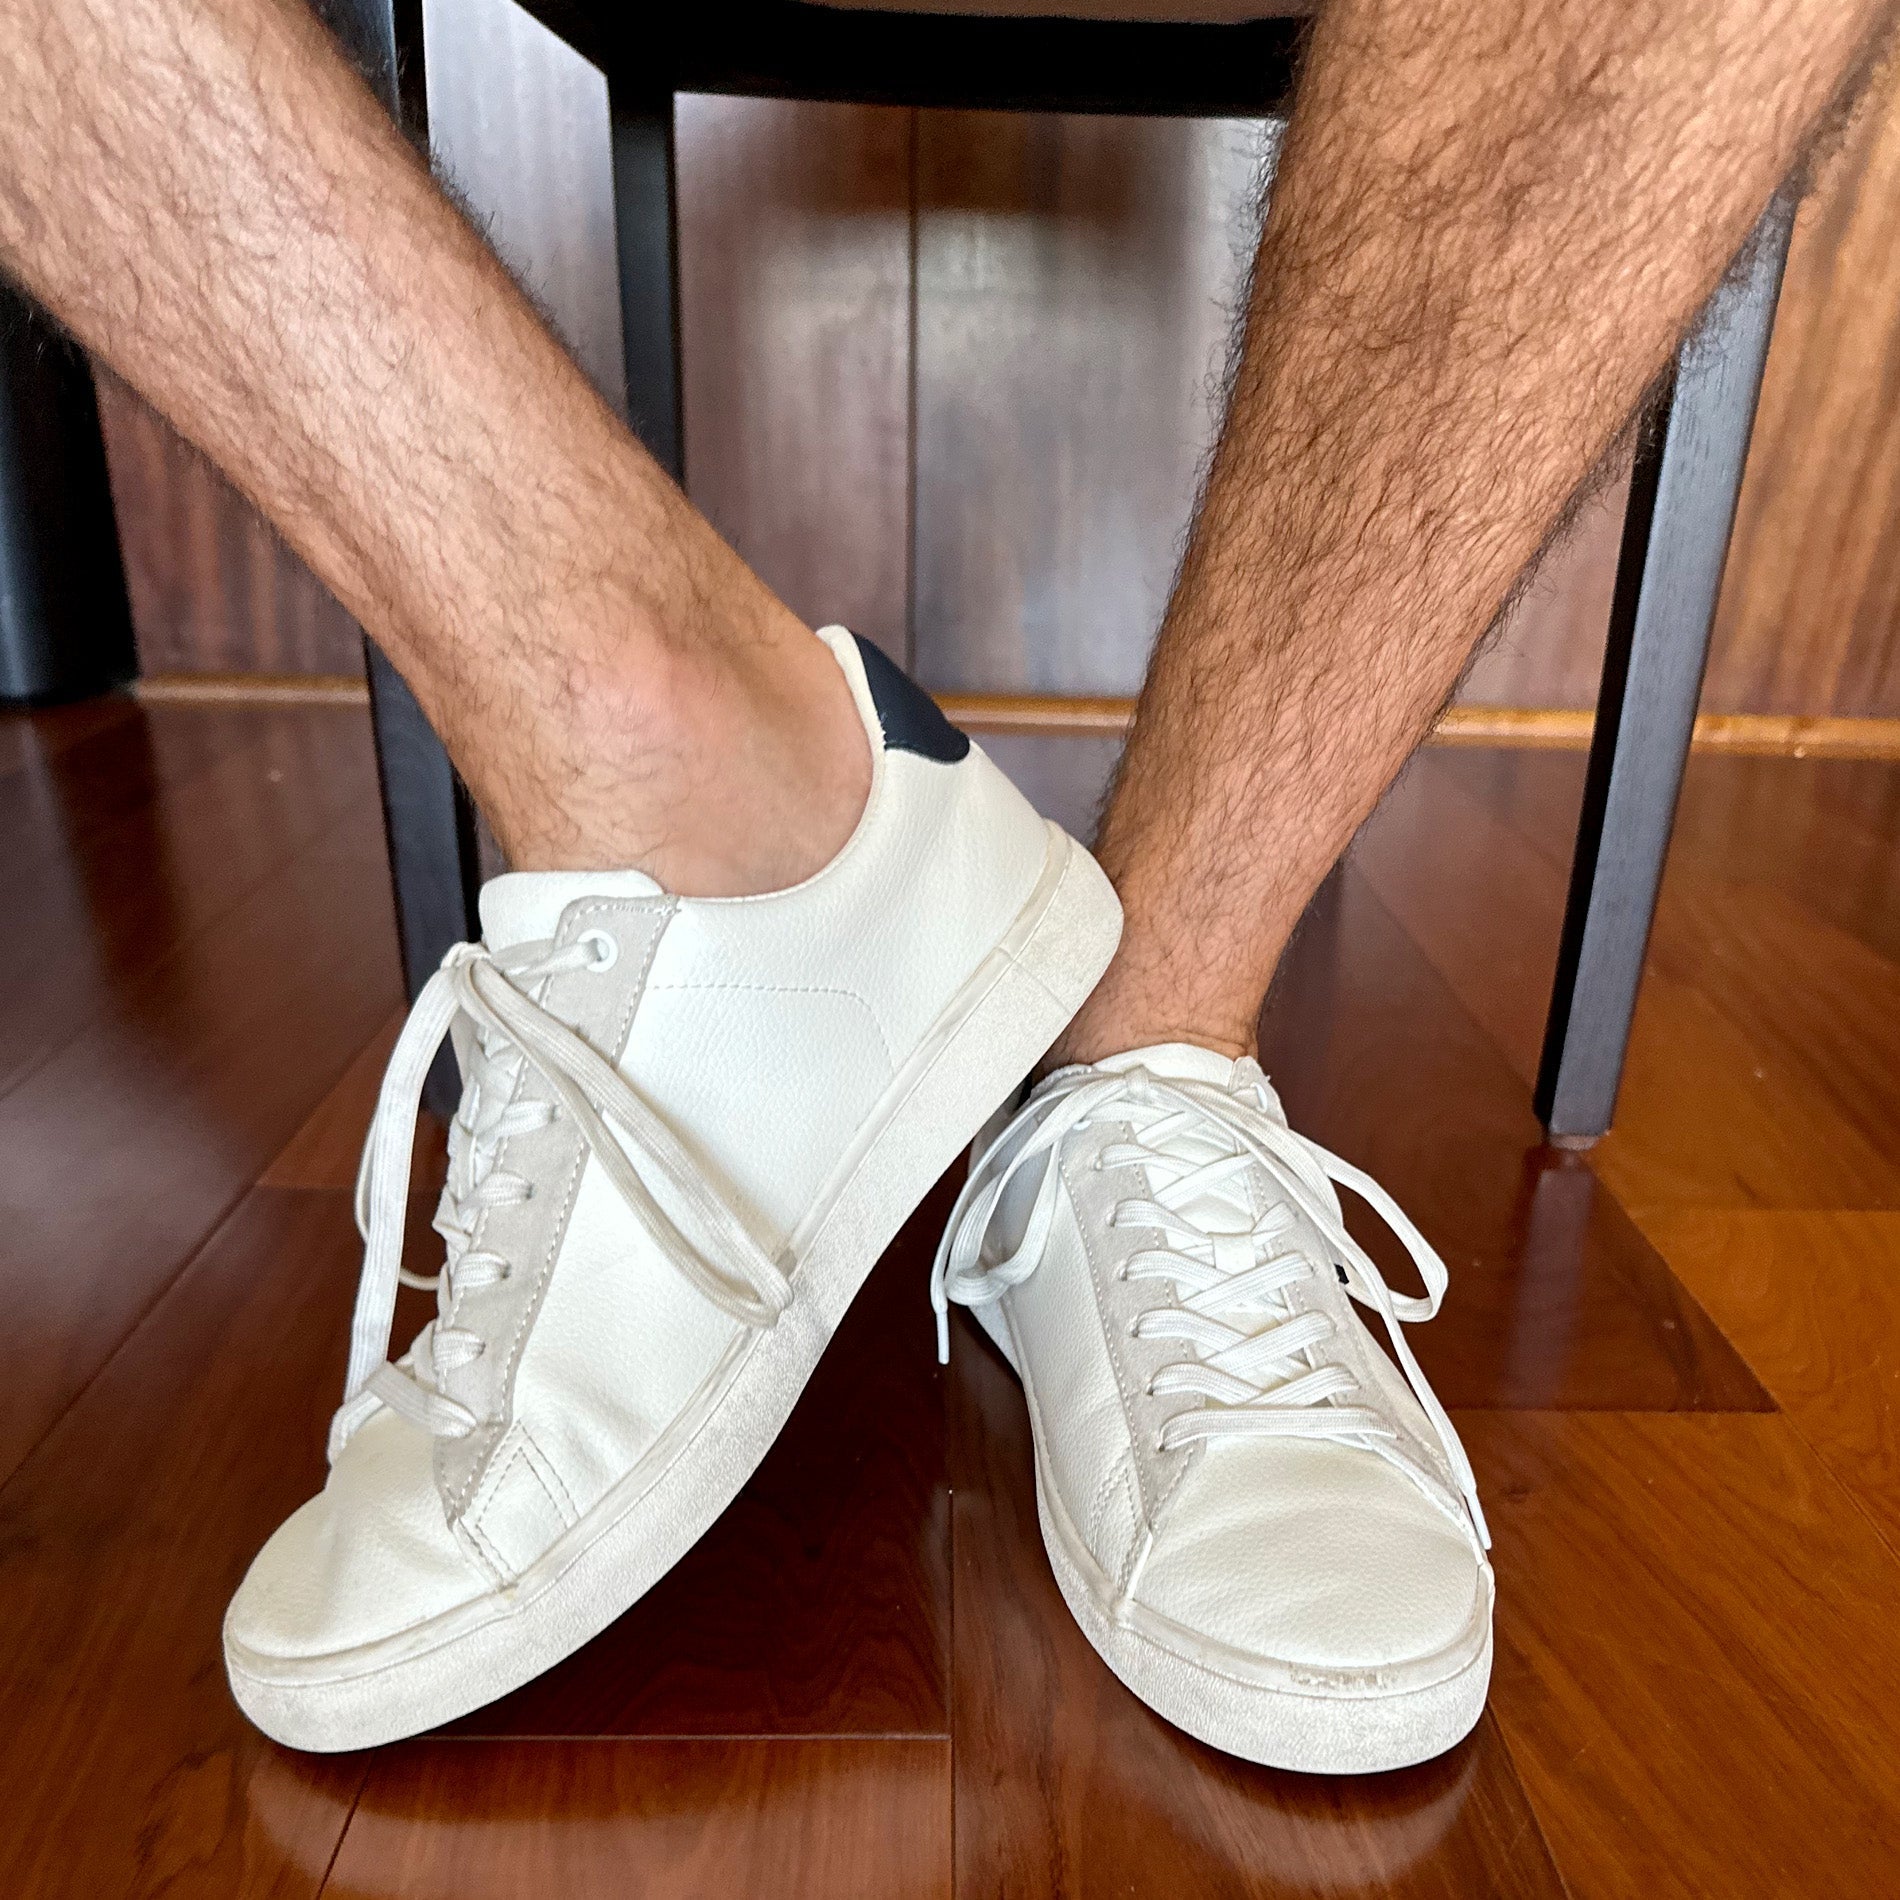 Photo of man's legs and feet wearing sneakers, with socks not visible